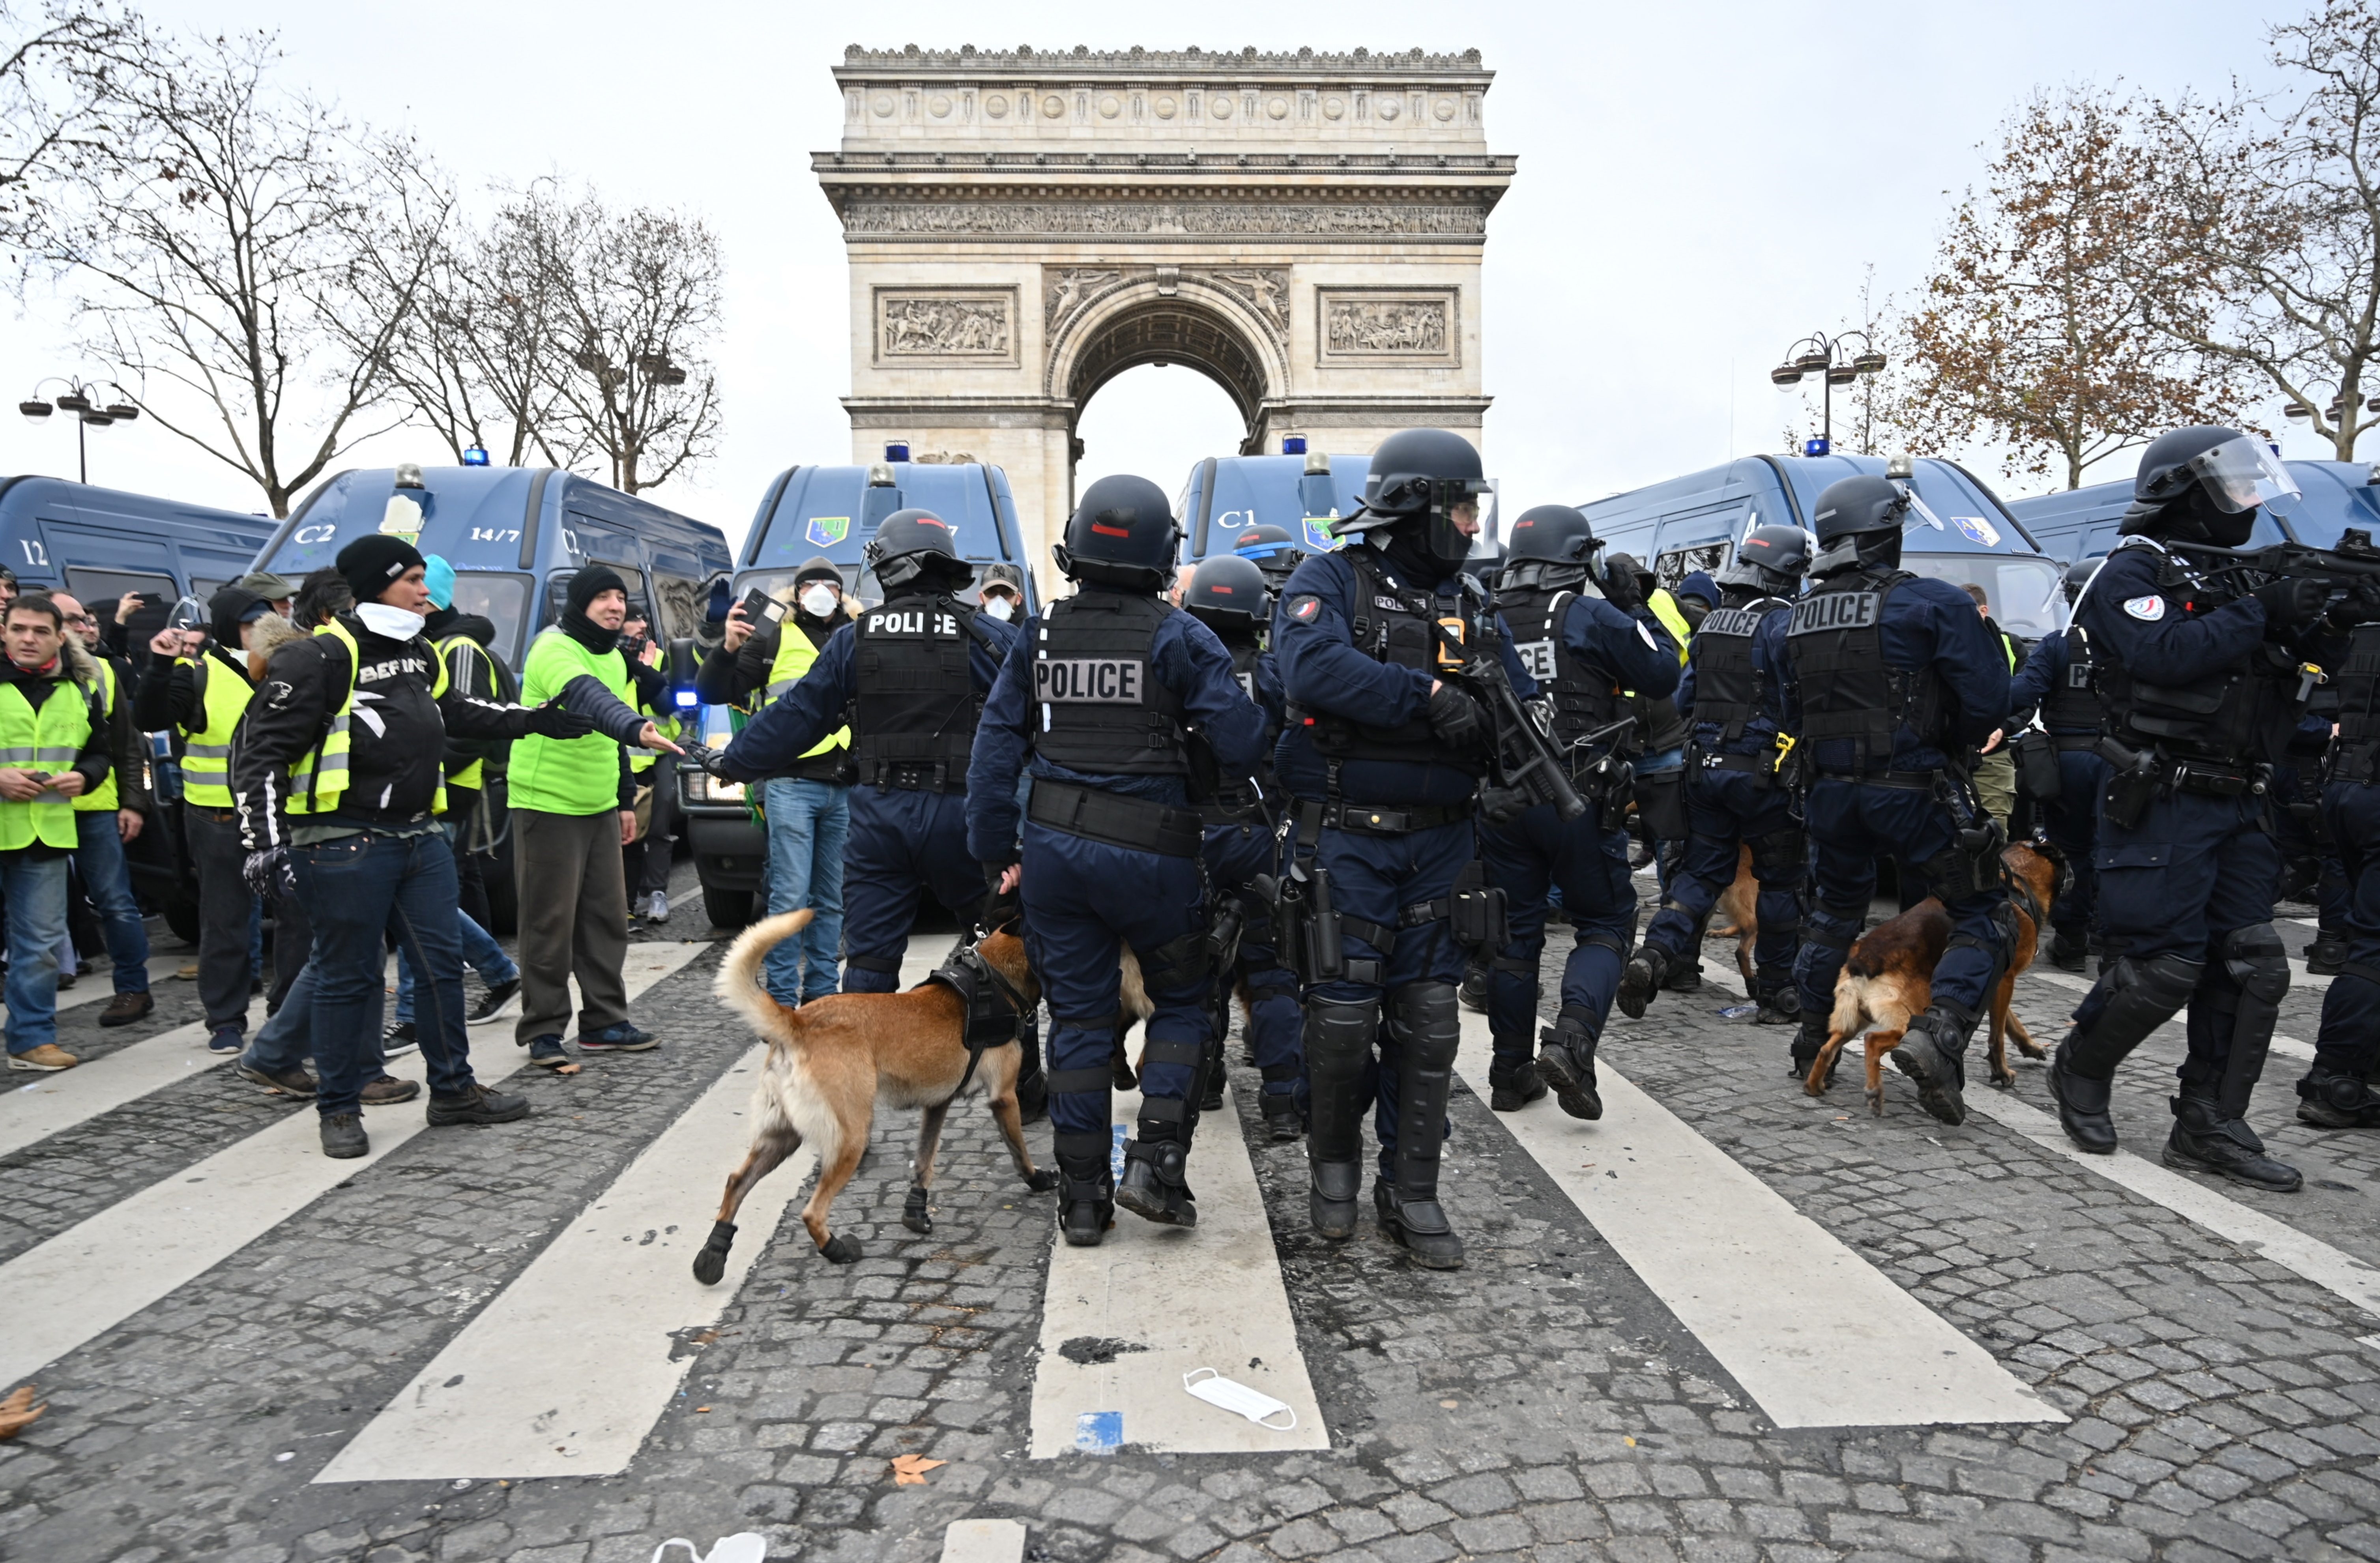 French riot police at the Arc de Triomphe break up protests against rising oil prices yesterday (Mustafa Yalcin/Anadolu Agency/Getty Images)